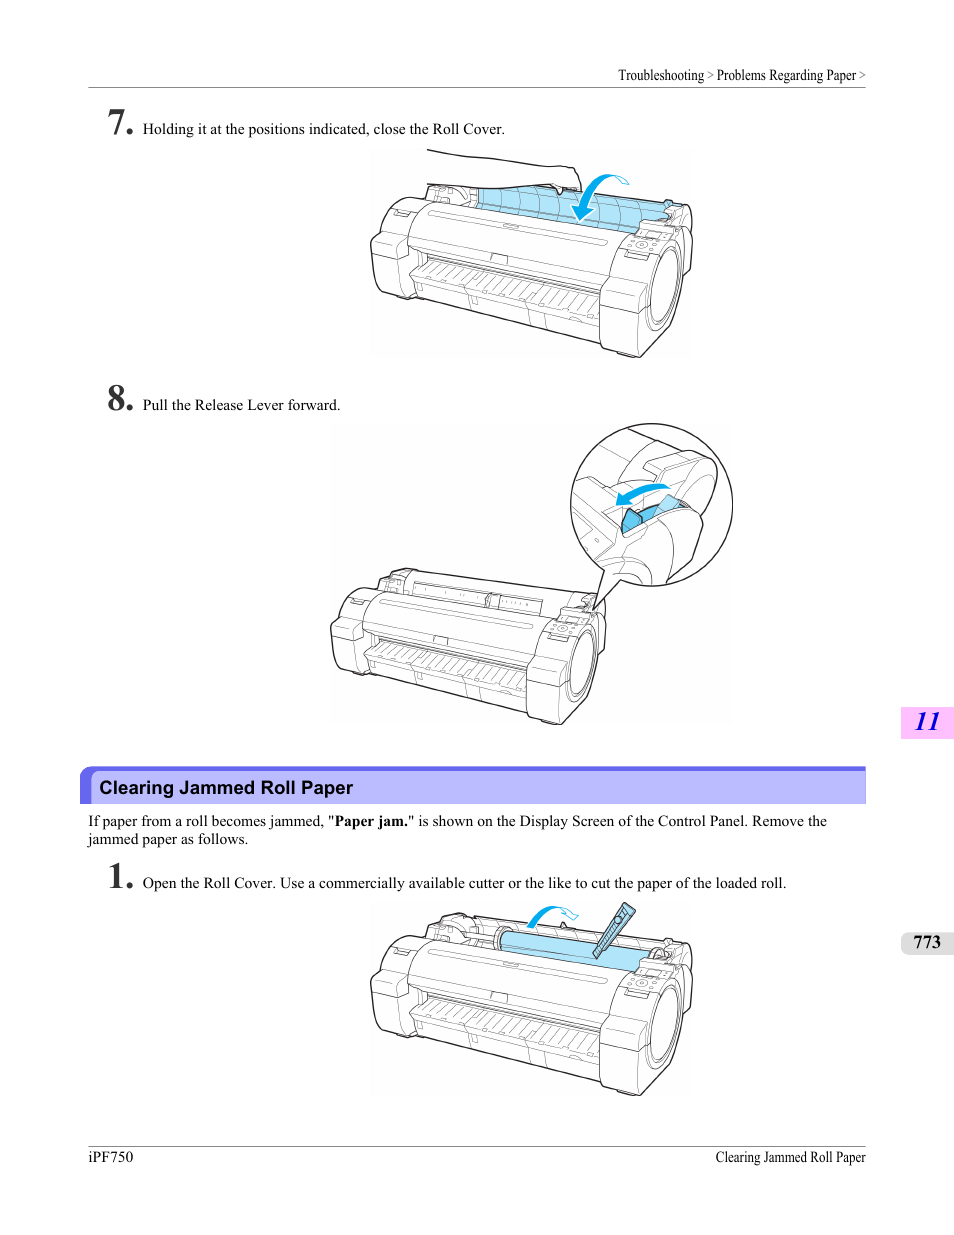 Clearing jammed roll paper | Canon imagePROGRAF iPF750 MFP M40 User Manual | Page 789 / 878